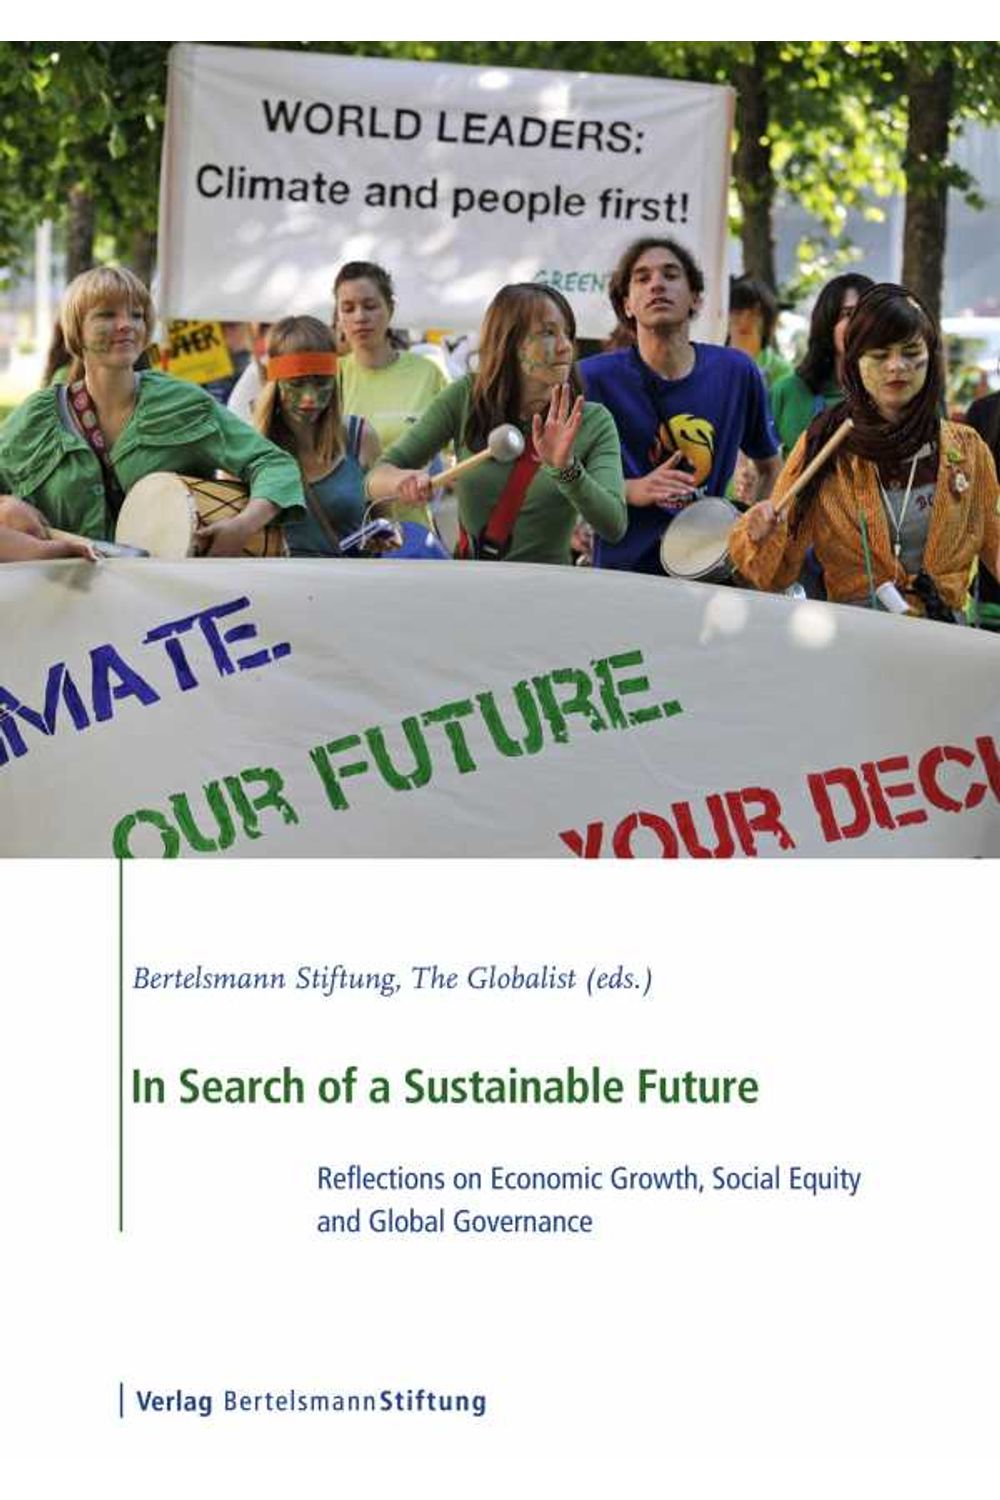 bw-in-search-of-a-sustainable-future-verlag-bertelsmann-stiftung-9783867935302